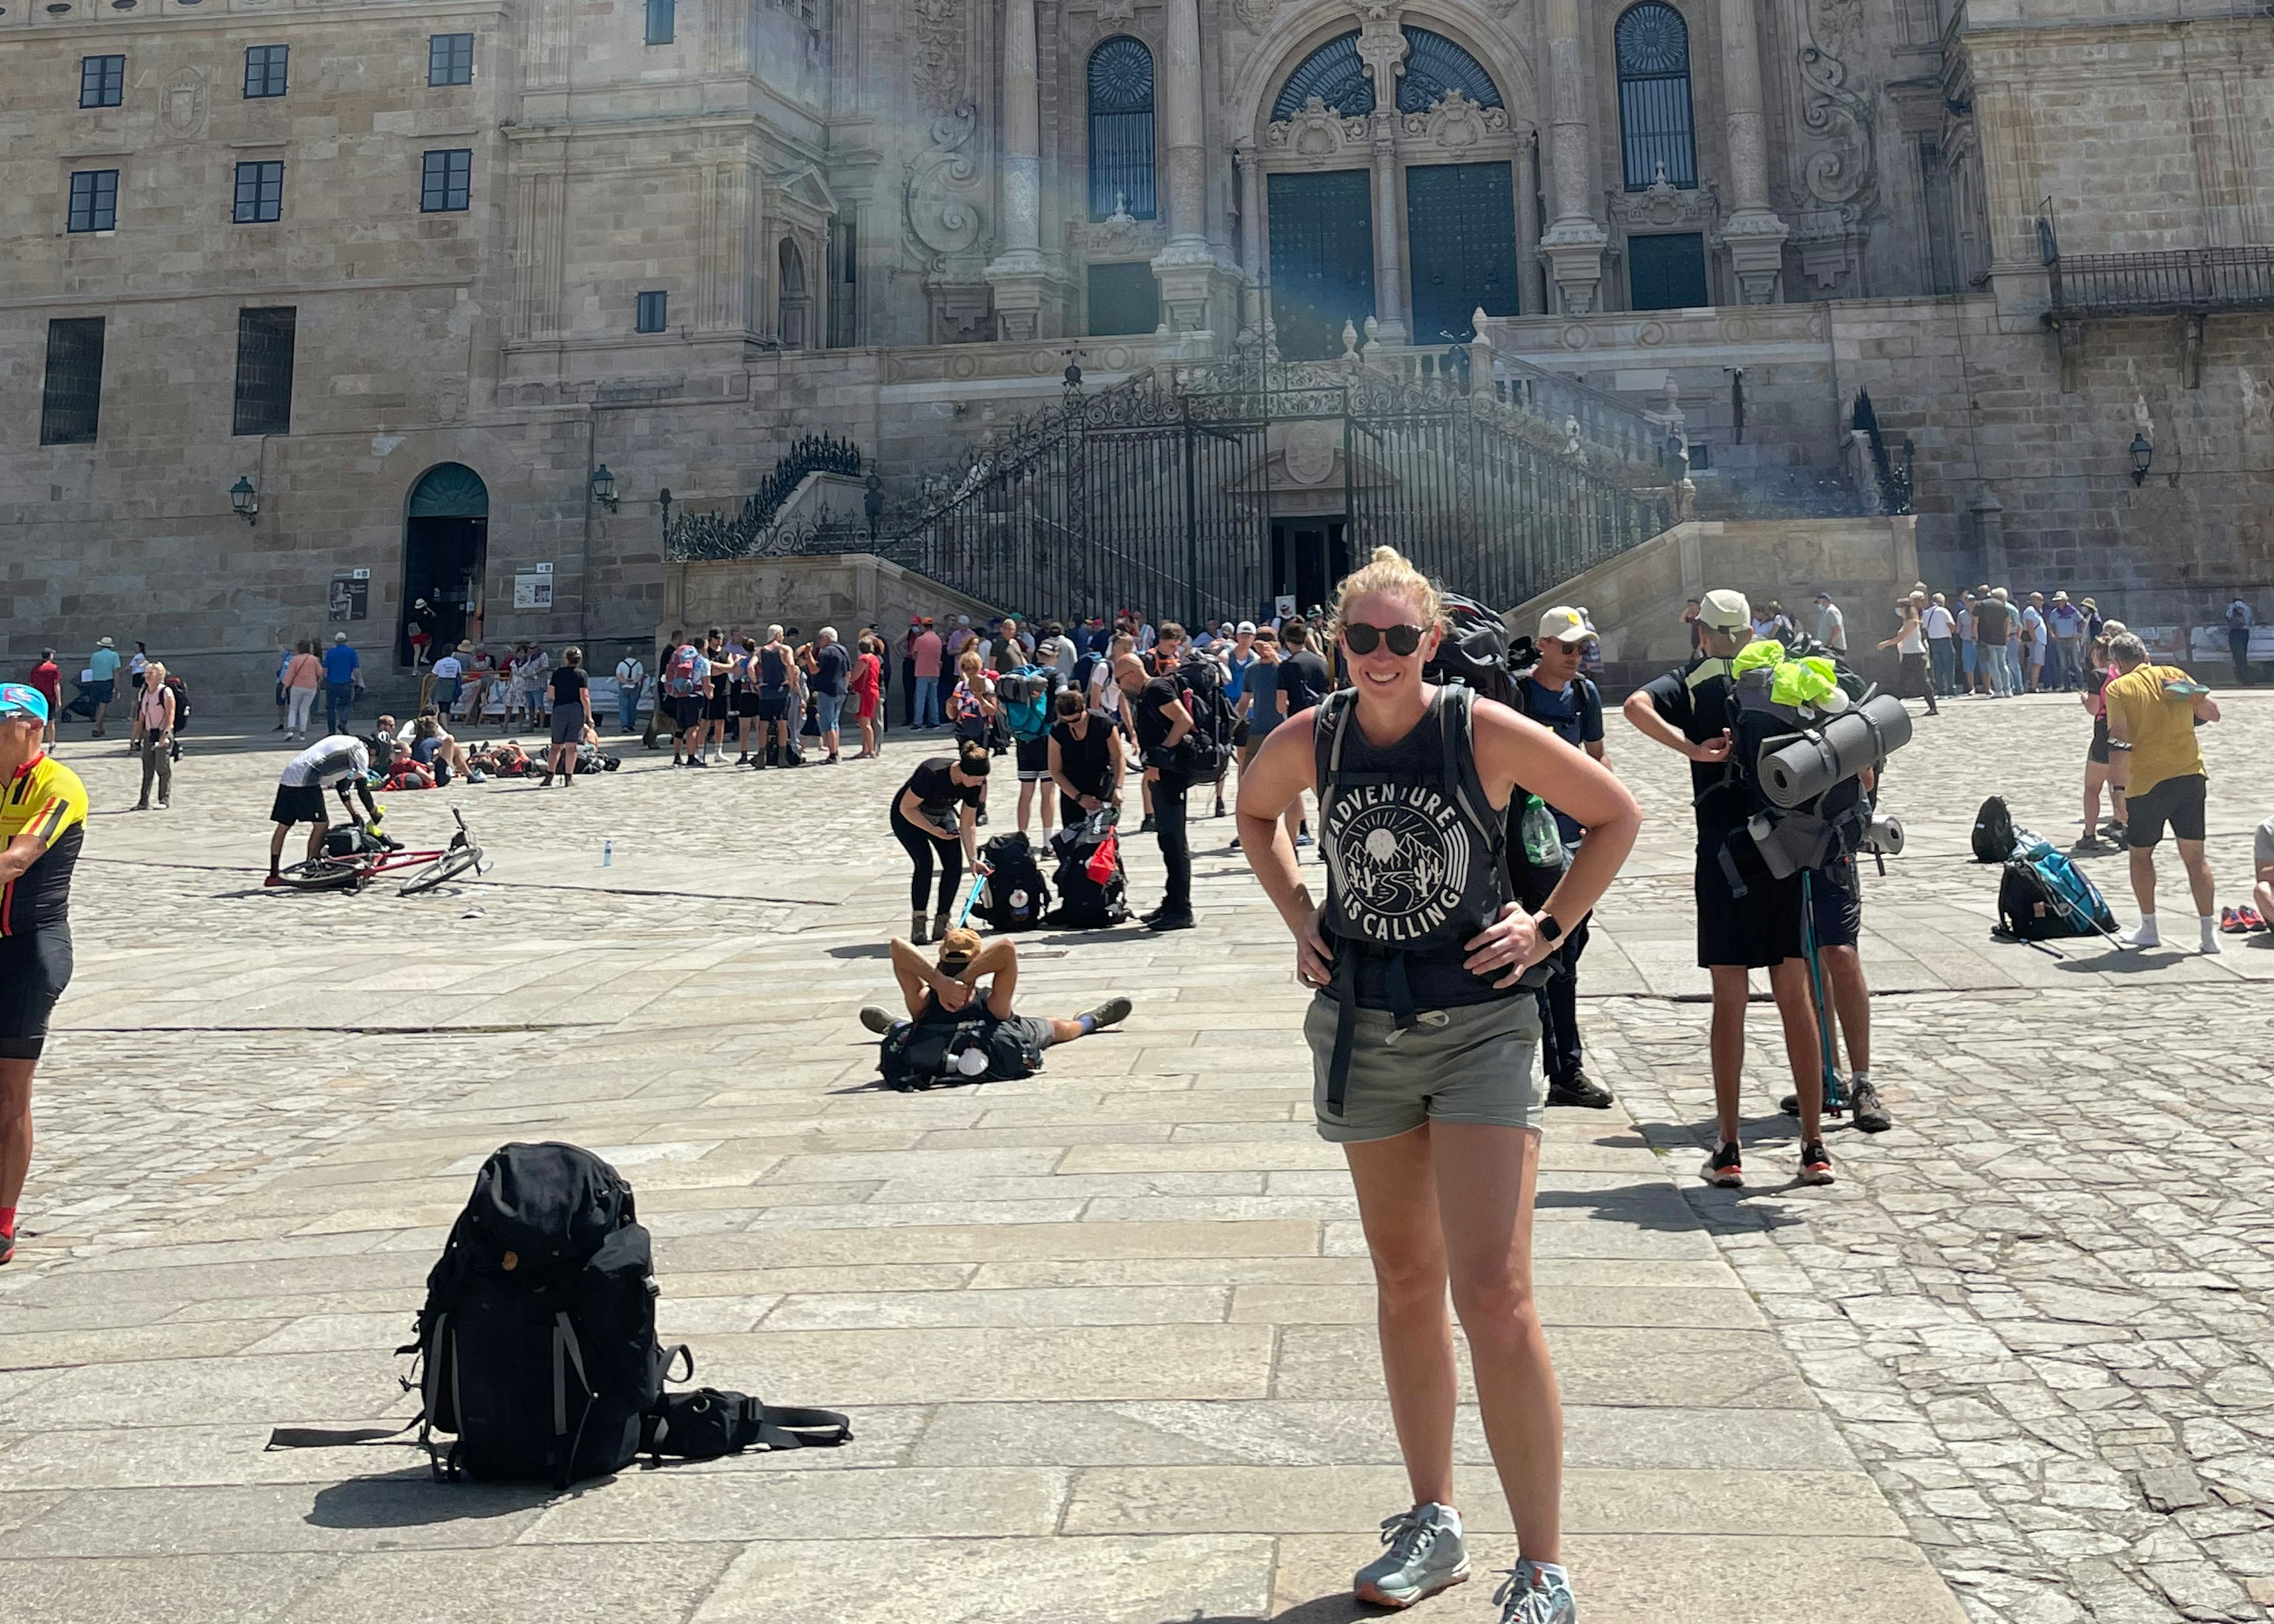 Senior editor Melissa Yeager at the cathedral ending her walk on the Camino de Santiago.